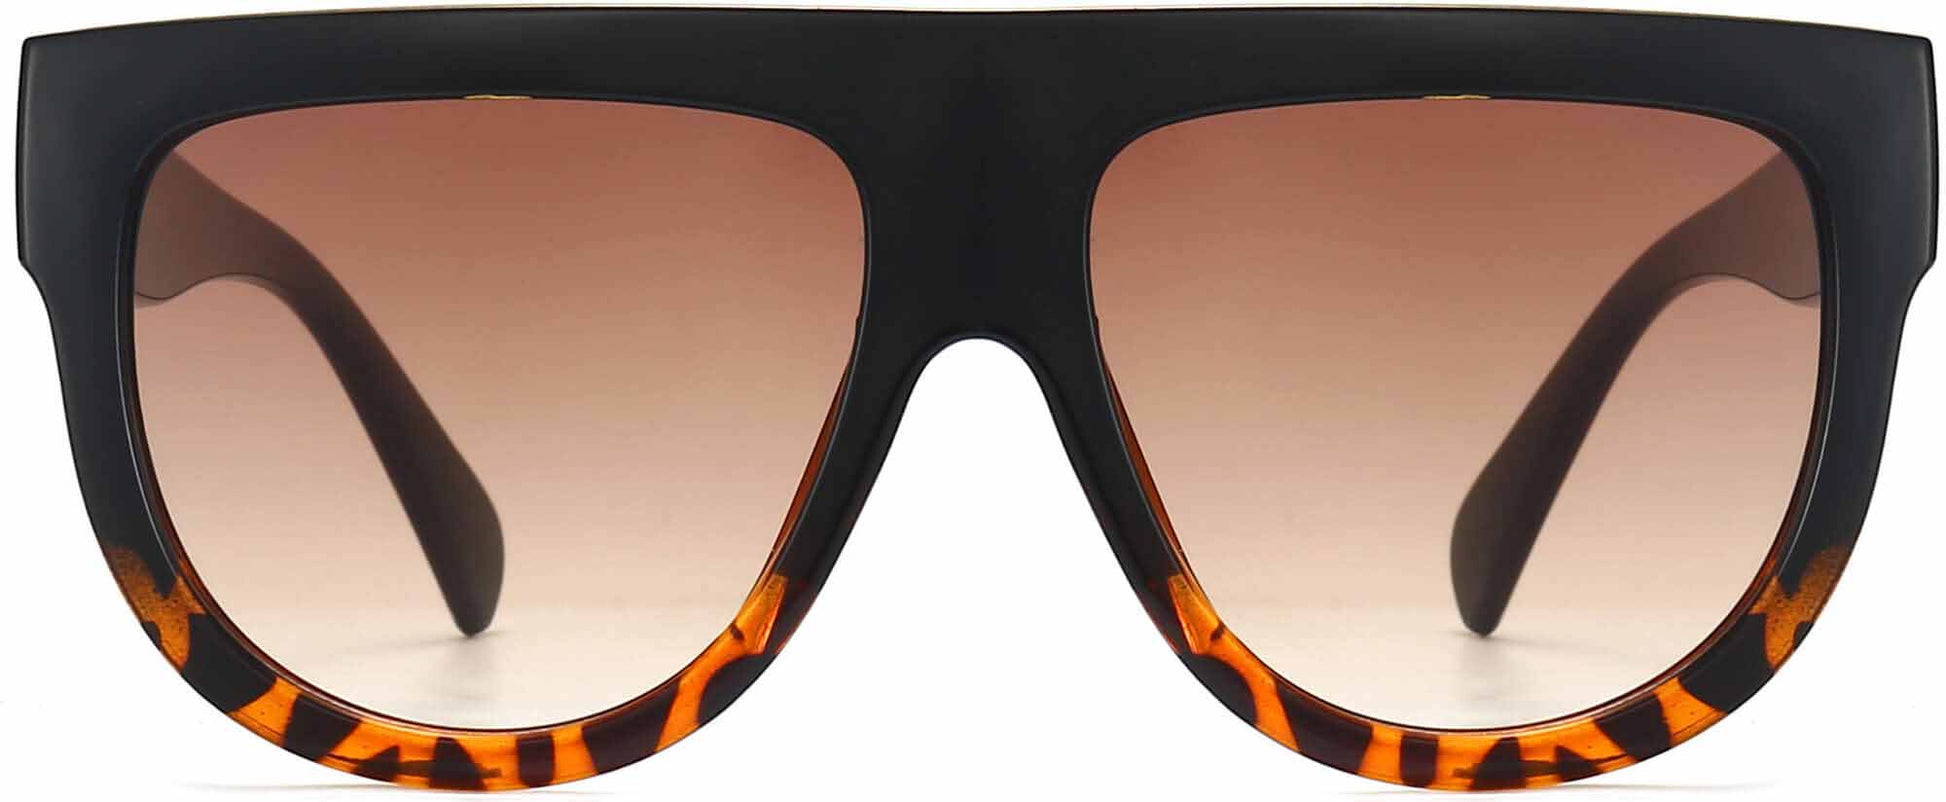 Archer Black Plastic Sunglasses from ANRRI, front view